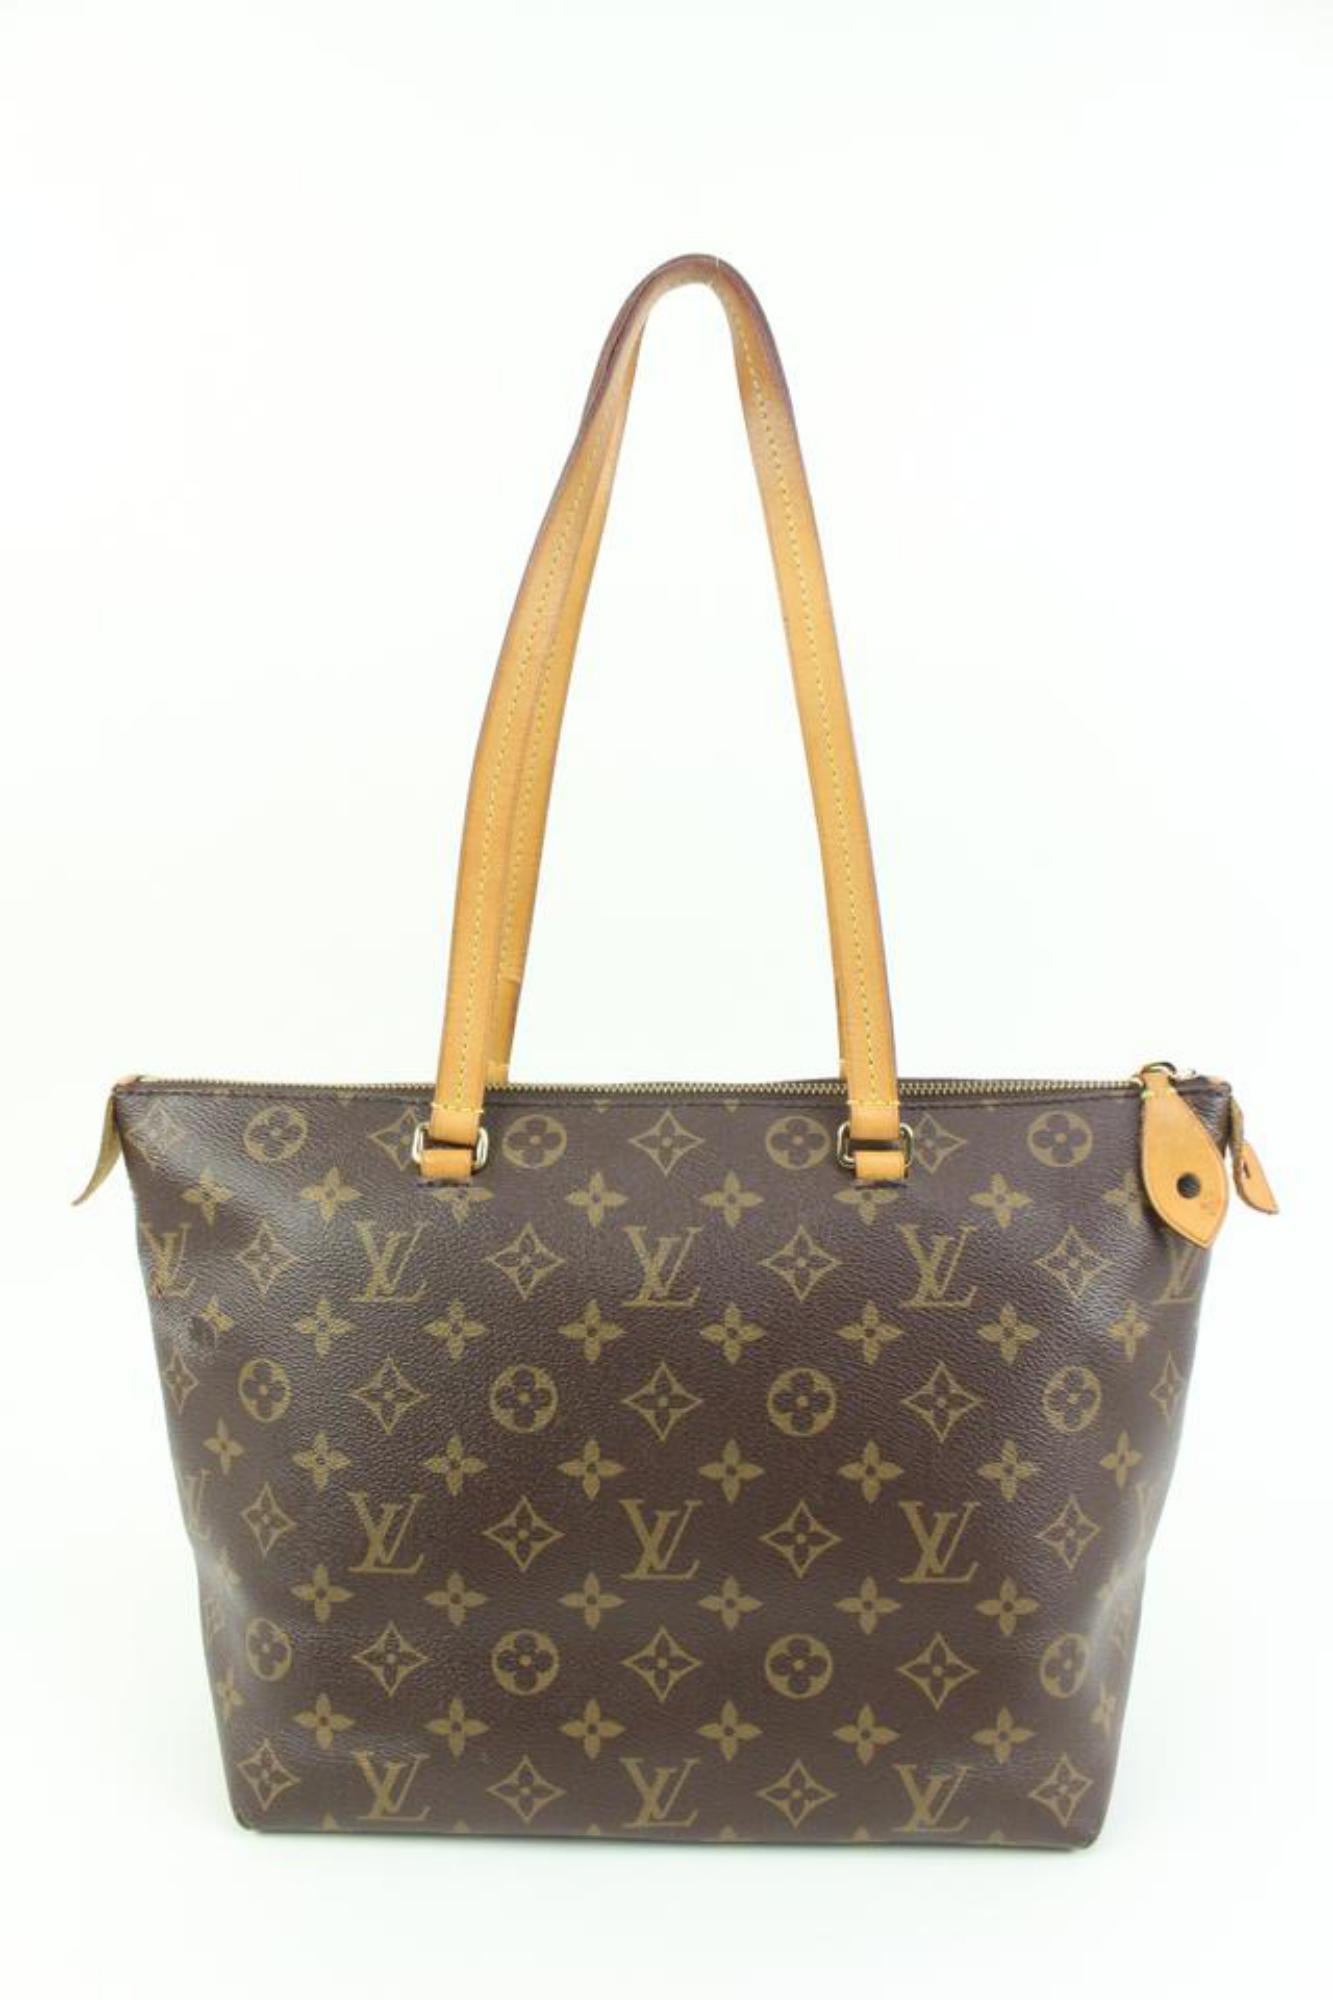 Louis Vuitton Monogram Iena PM Shoulder bag 79lk322s In Good Condition For Sale In Dix hills, NY